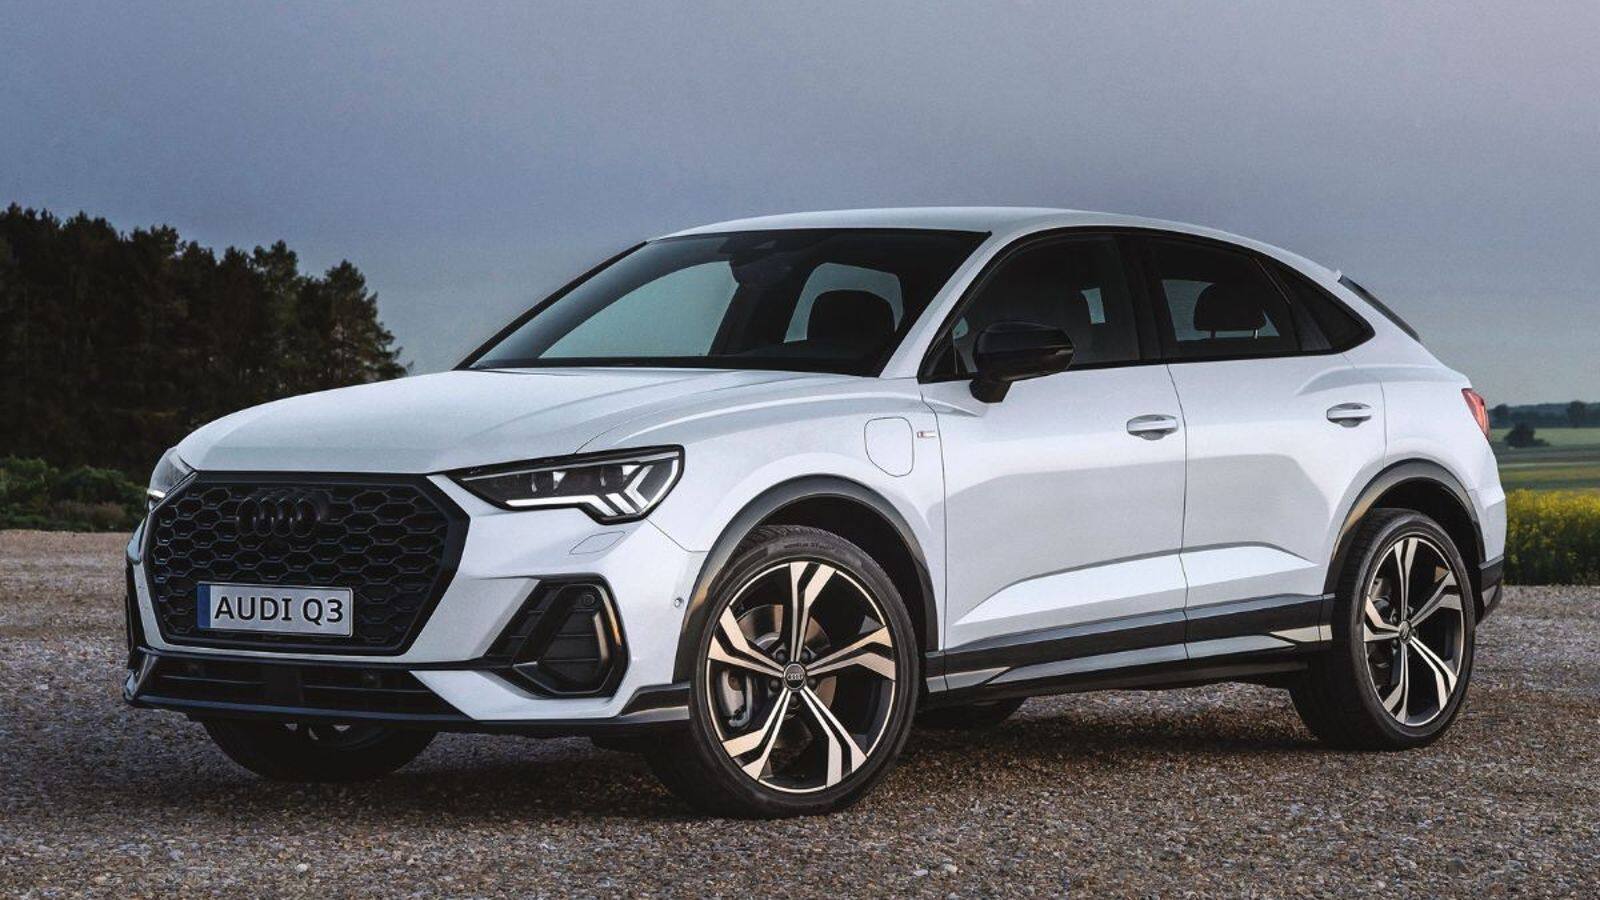 Audi India launches limited-run 'Bold Edition' of Q3, Q3 Sportback